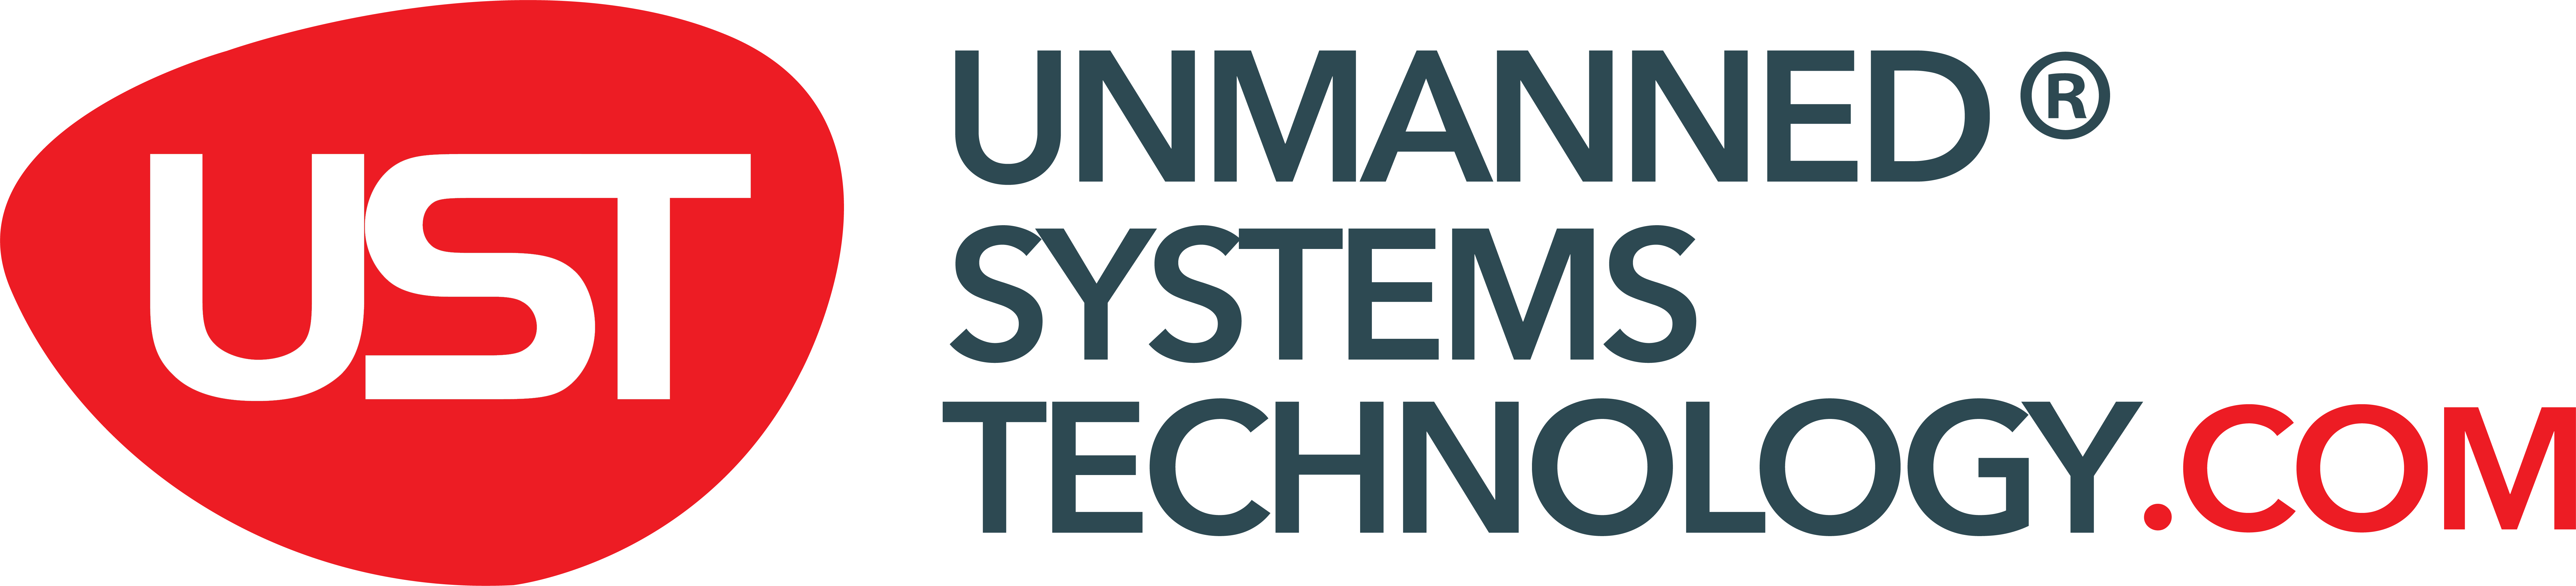 Unmanned systems technology